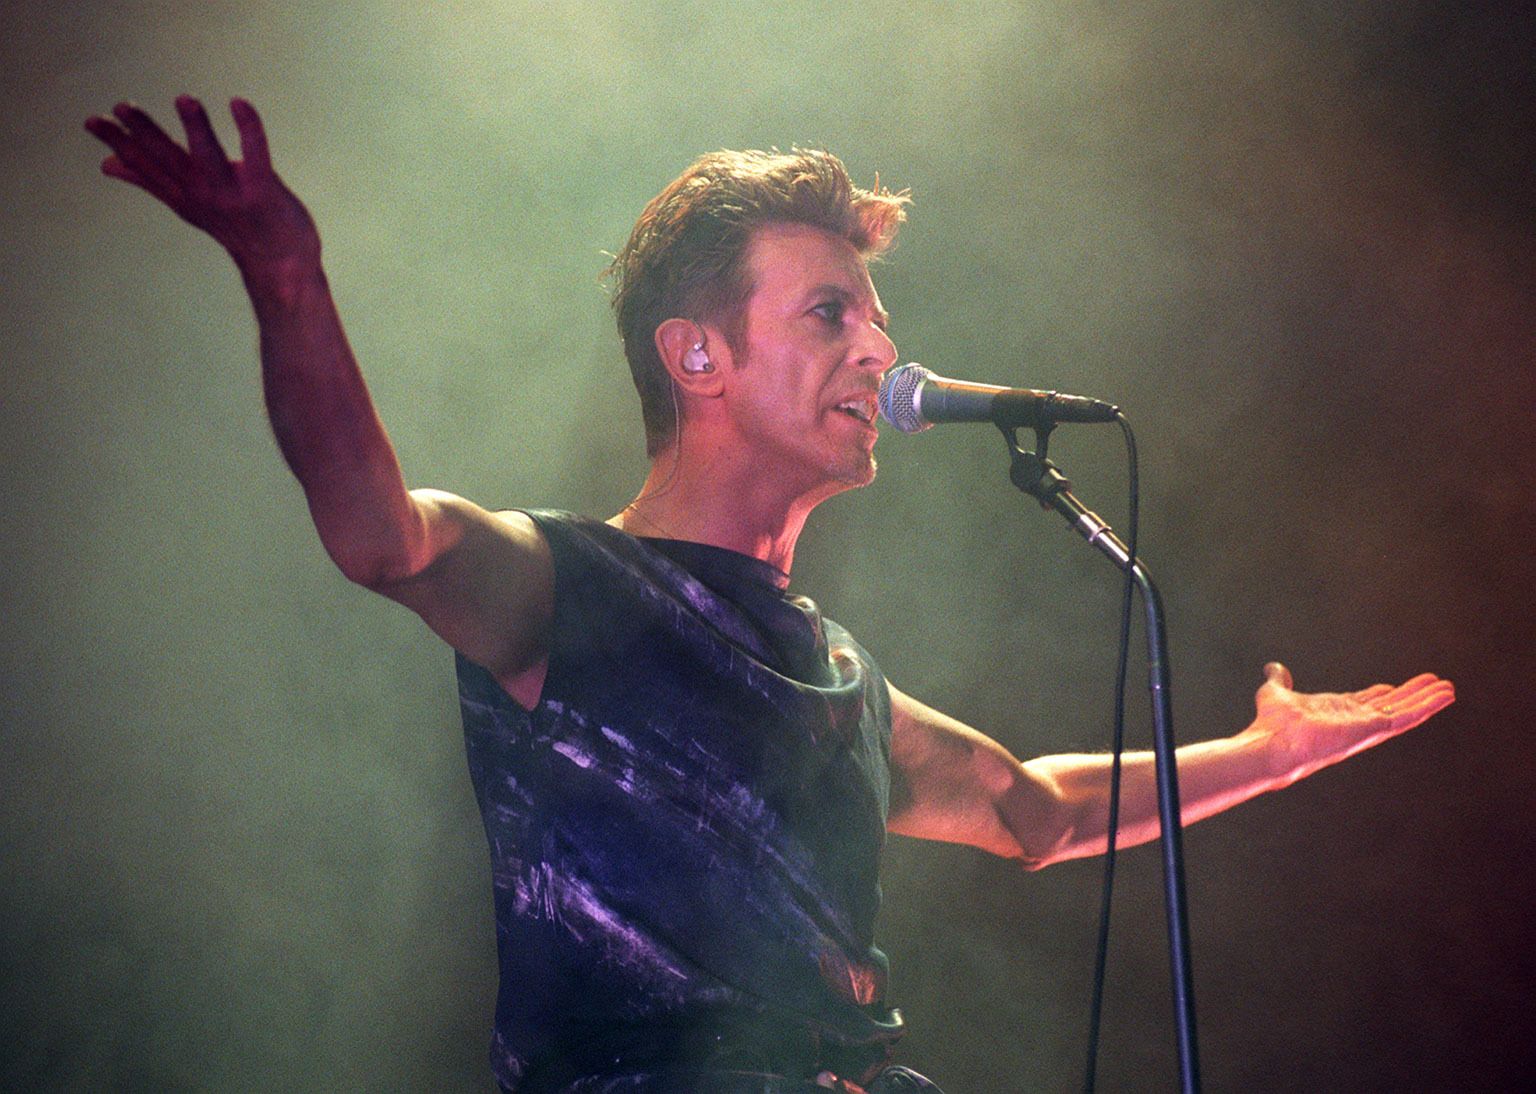 Bowie performing in 1995